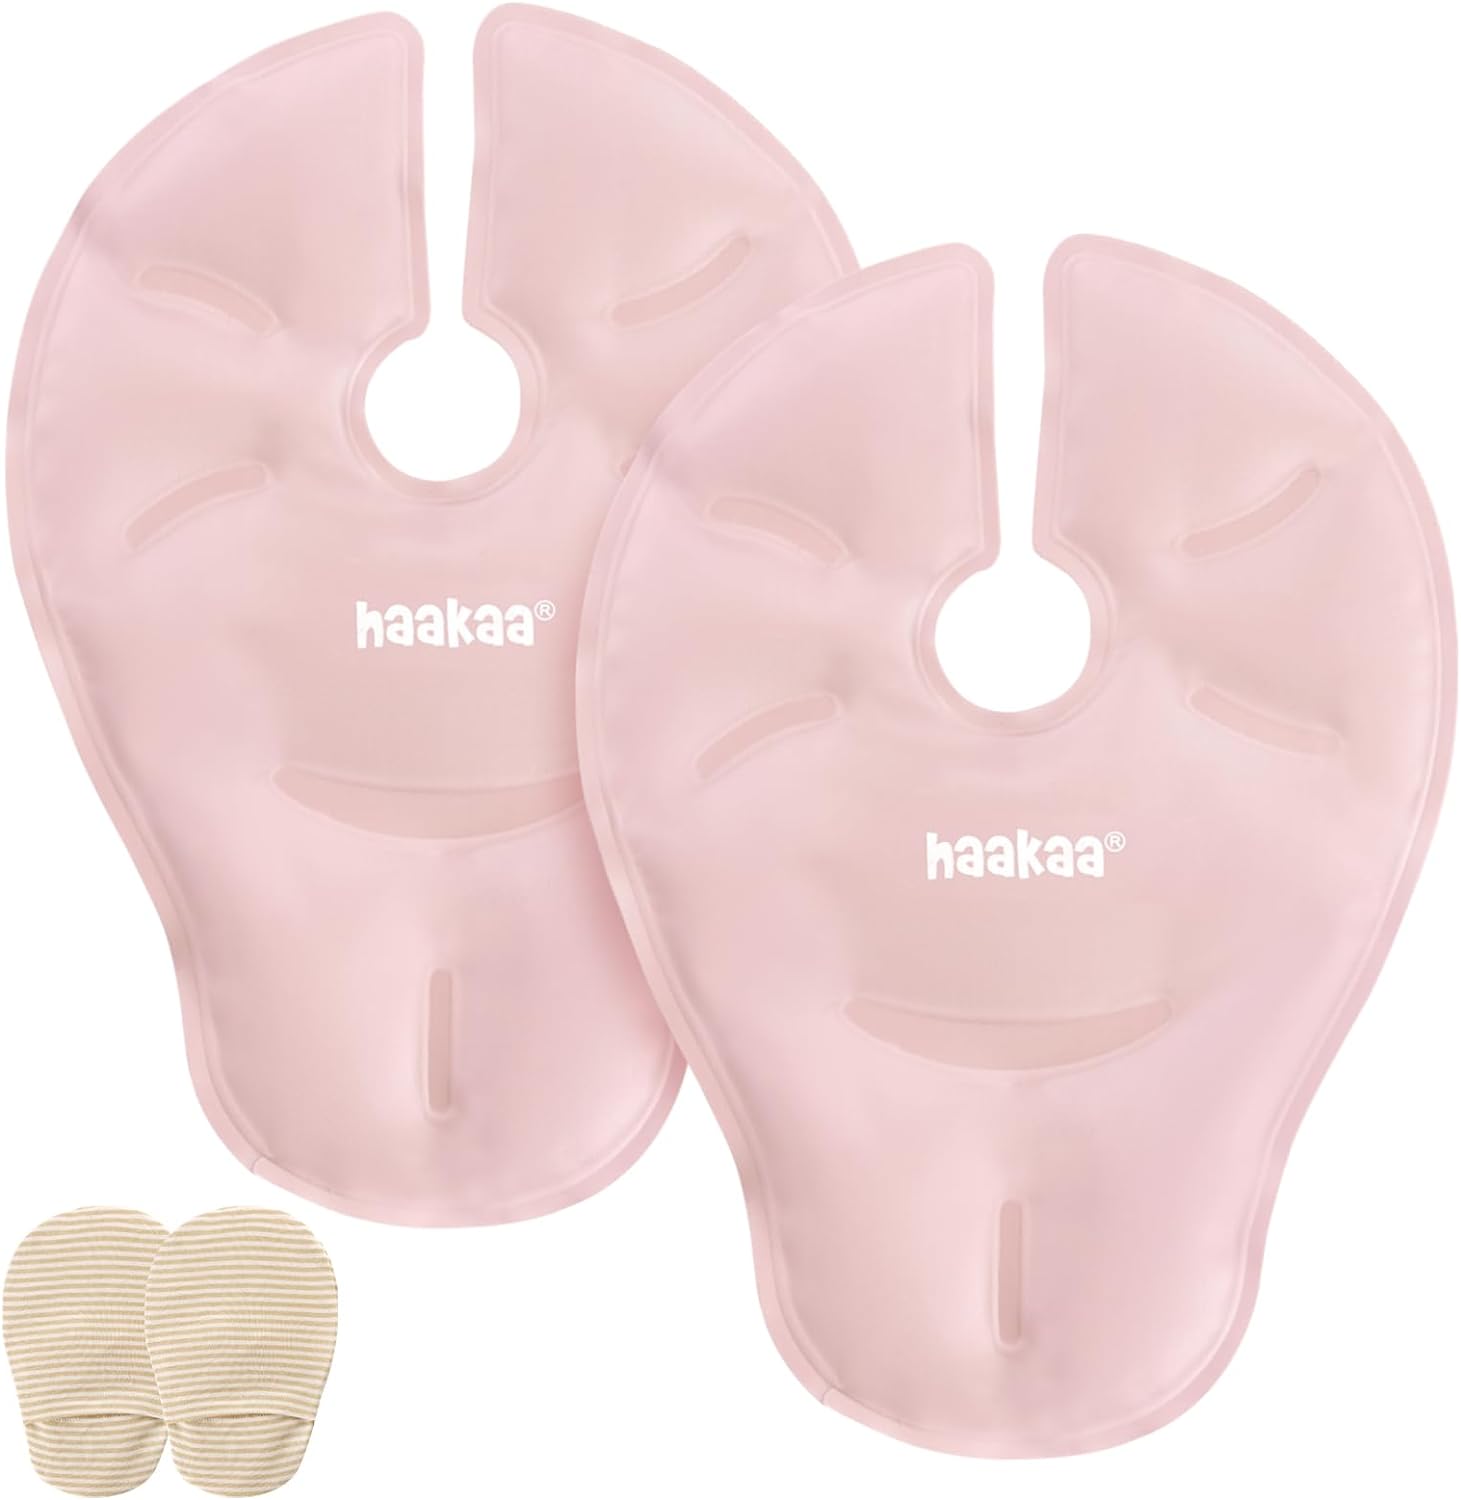 Haakaa Breast Therapy Packs Breast Ice Packs Breast Heating Pad Breastfeeding Essentials, Improve Milk Flow, Reduces Pain, Relieve Blockages & Mastitis (2pk, Blush)